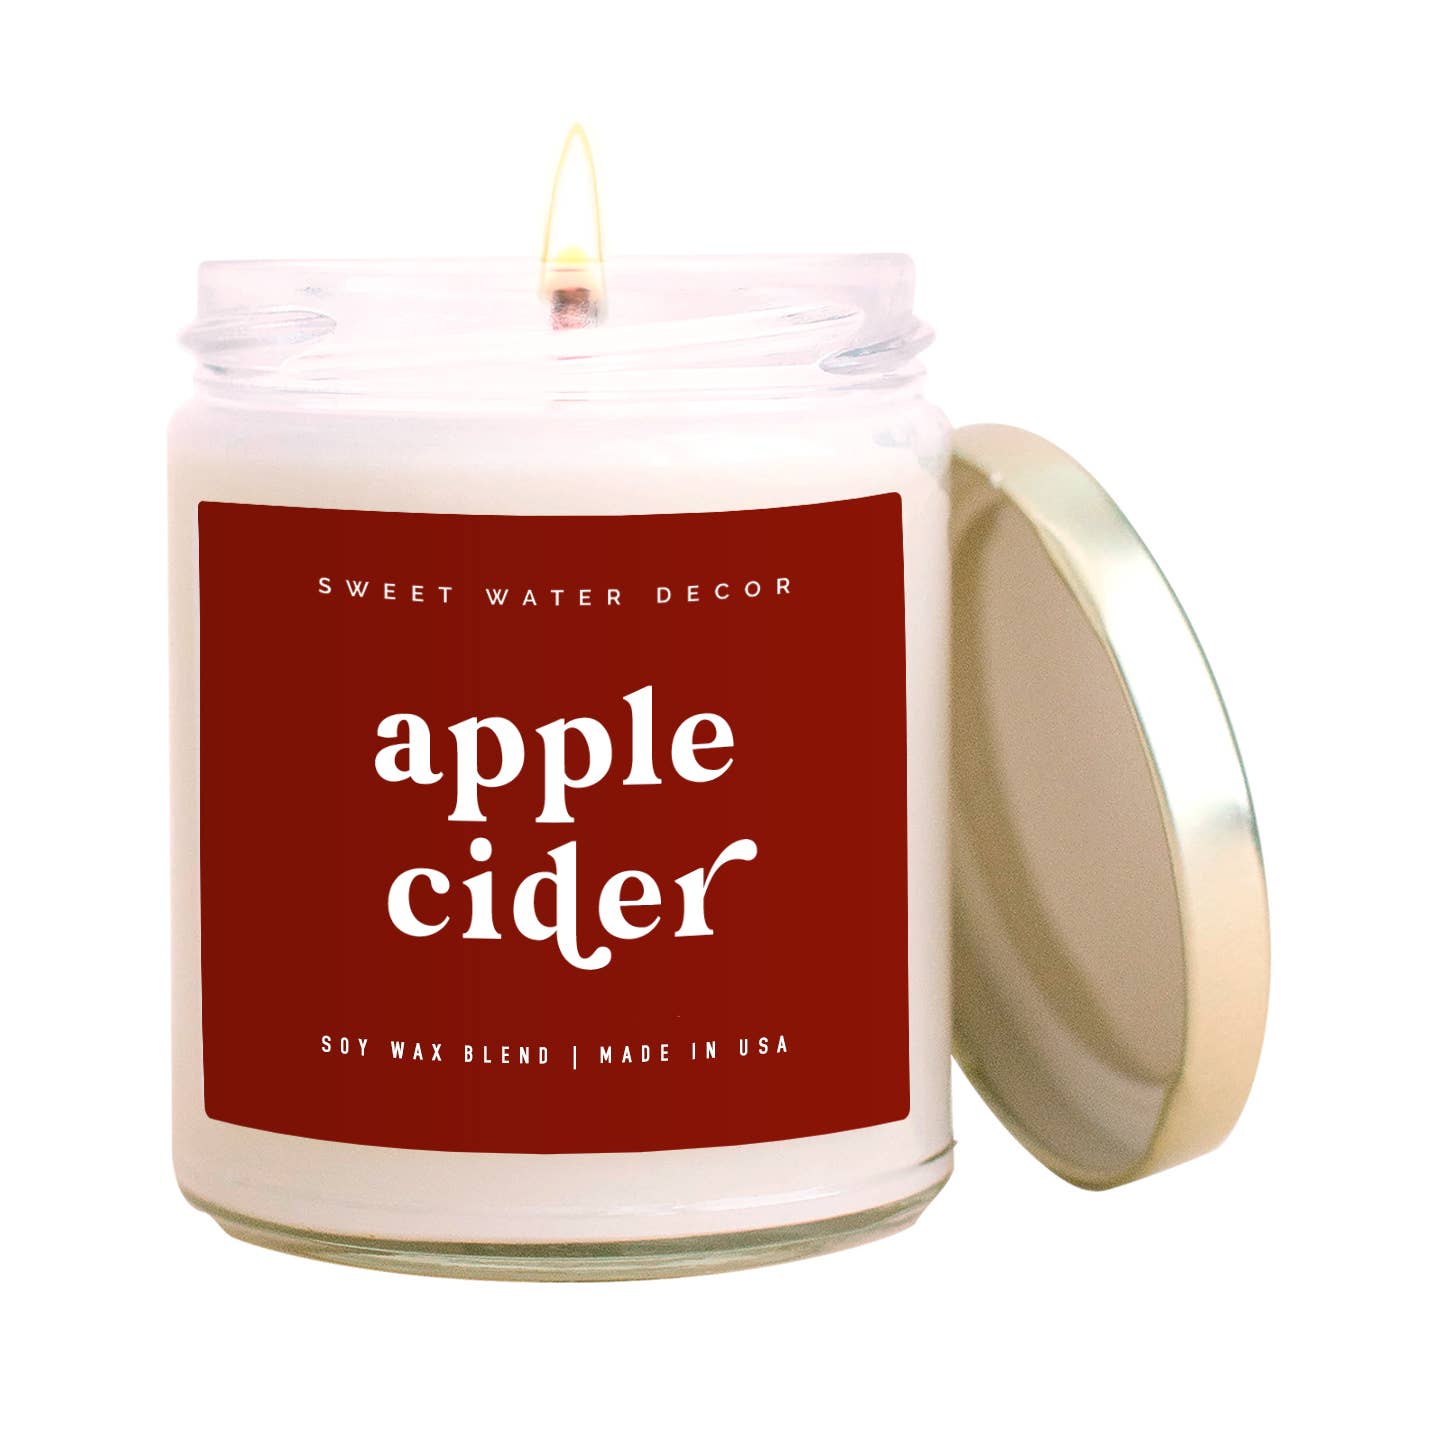 Sweet Water Decor Apple Cider 9 oz Soy Candle